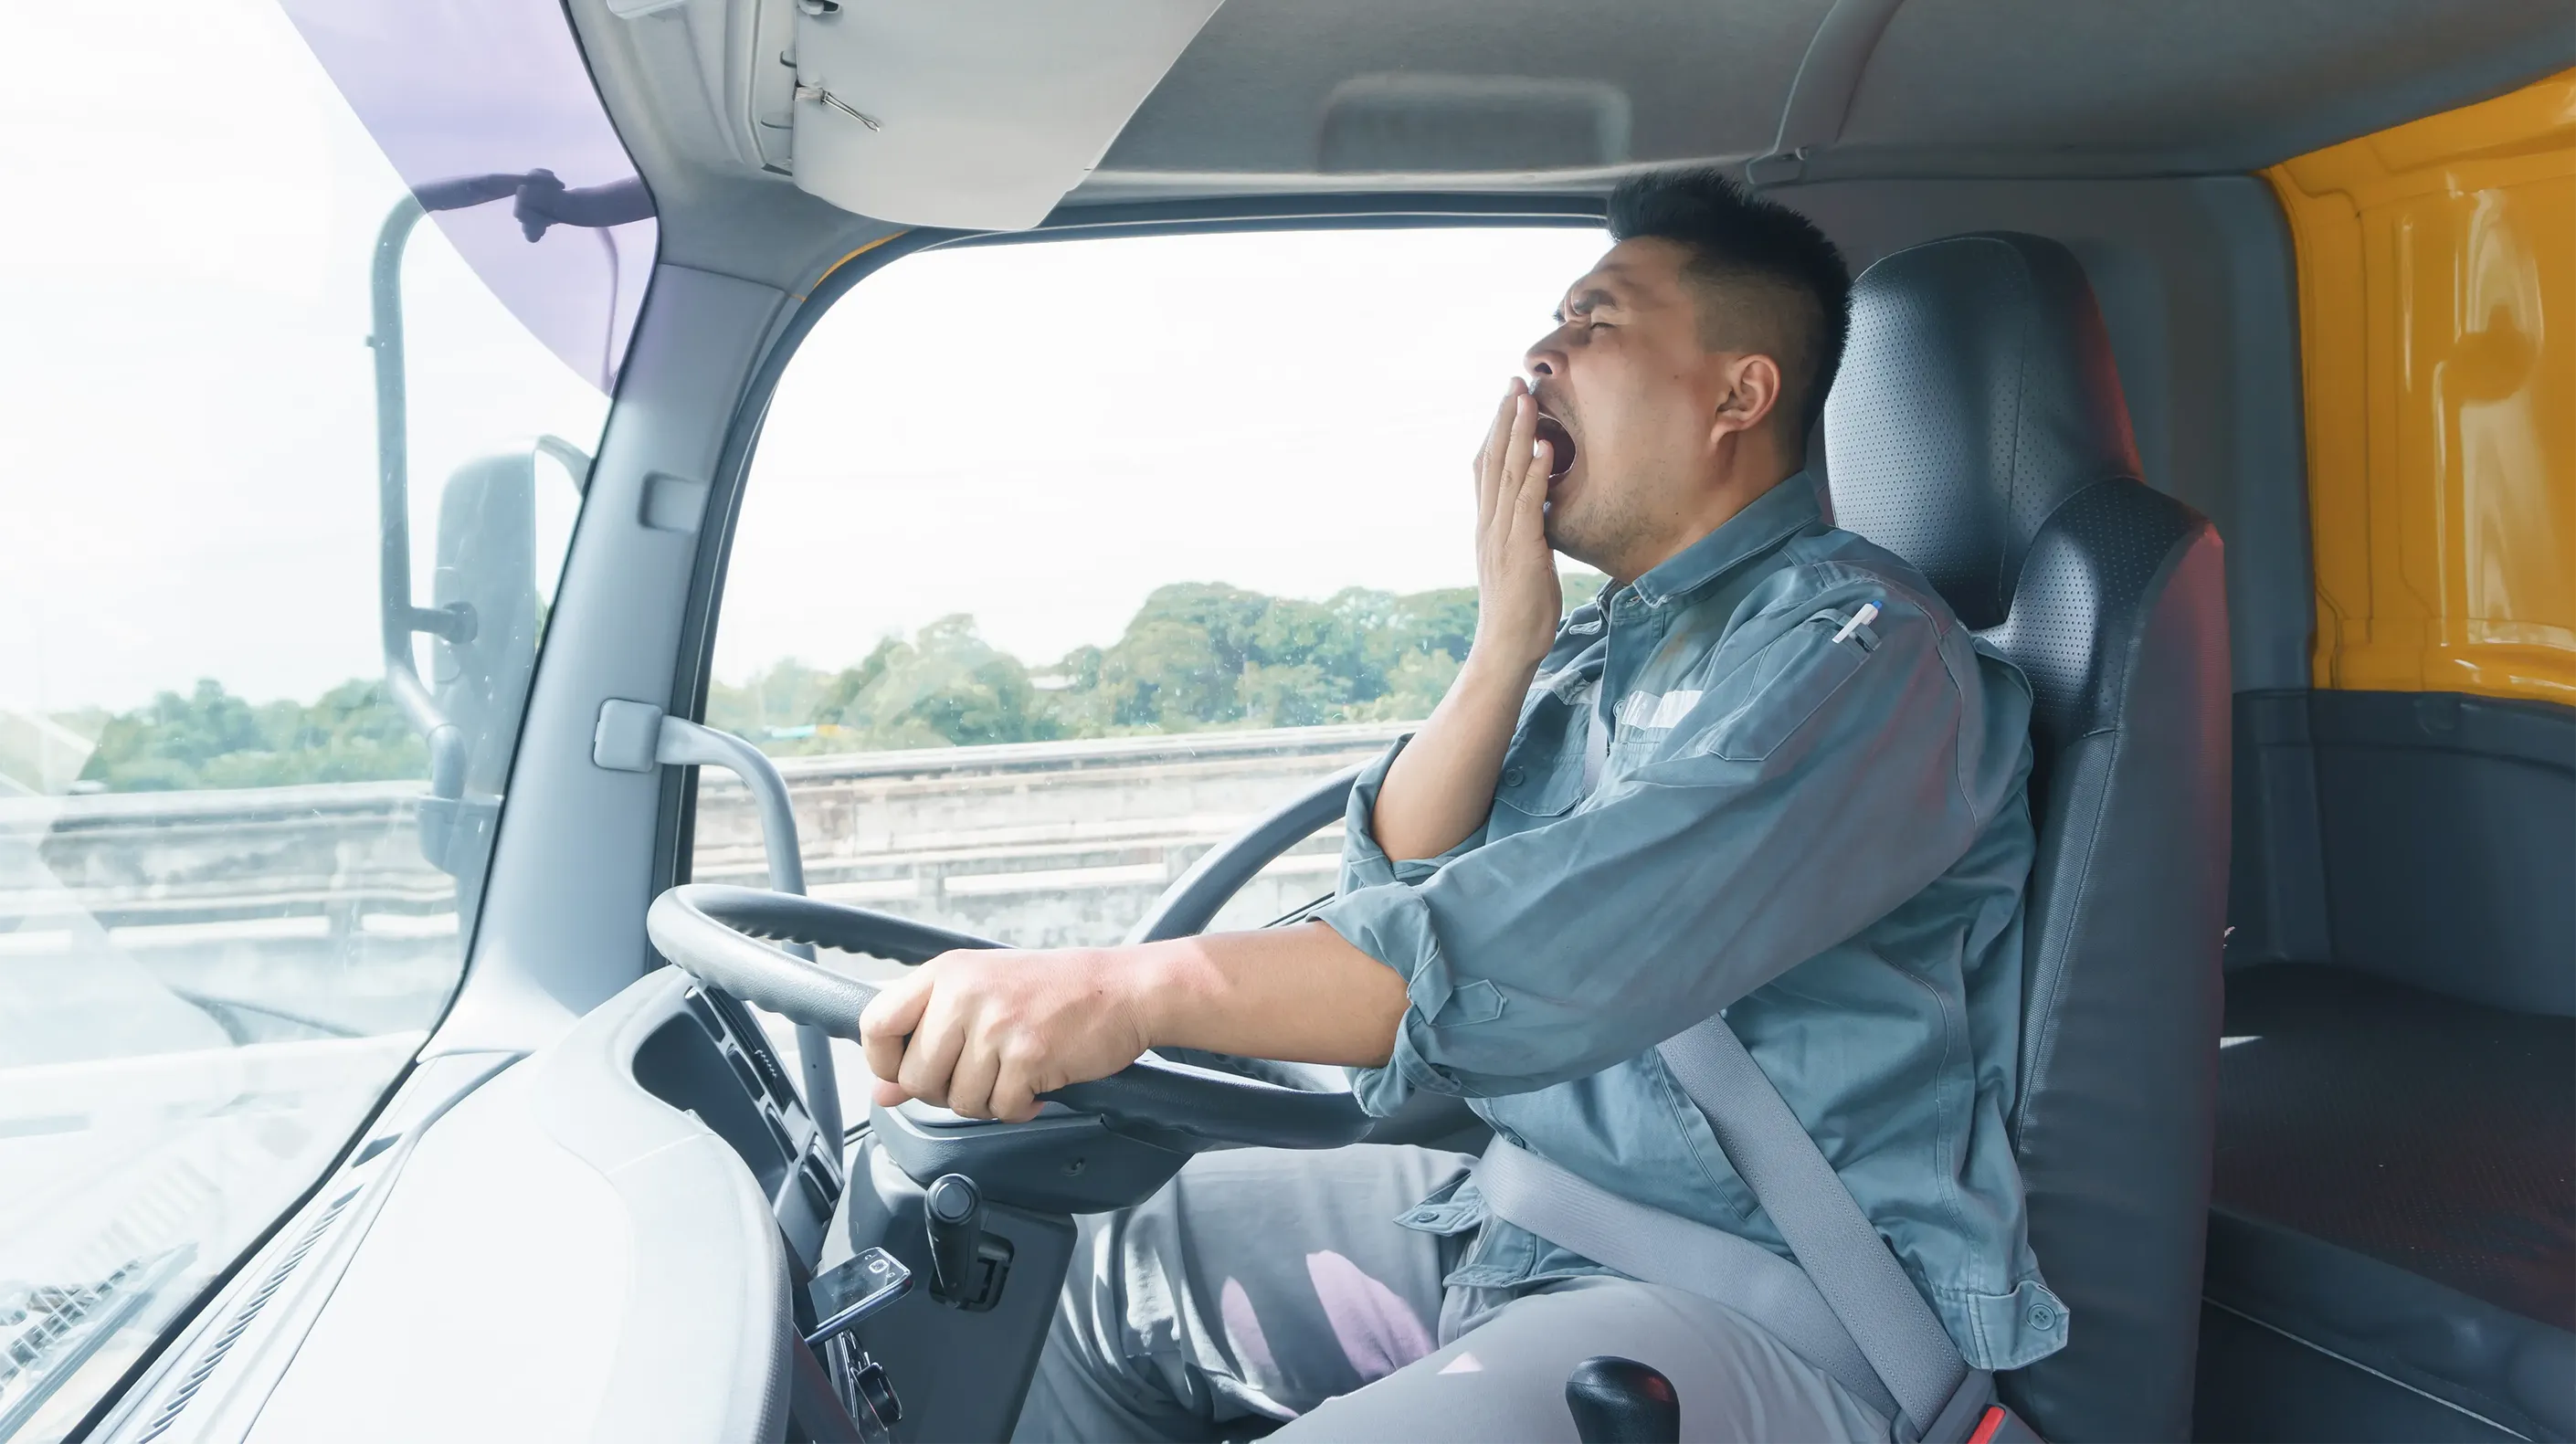 A tired truck driver yawning while holding onto the steering wheel with one hand.